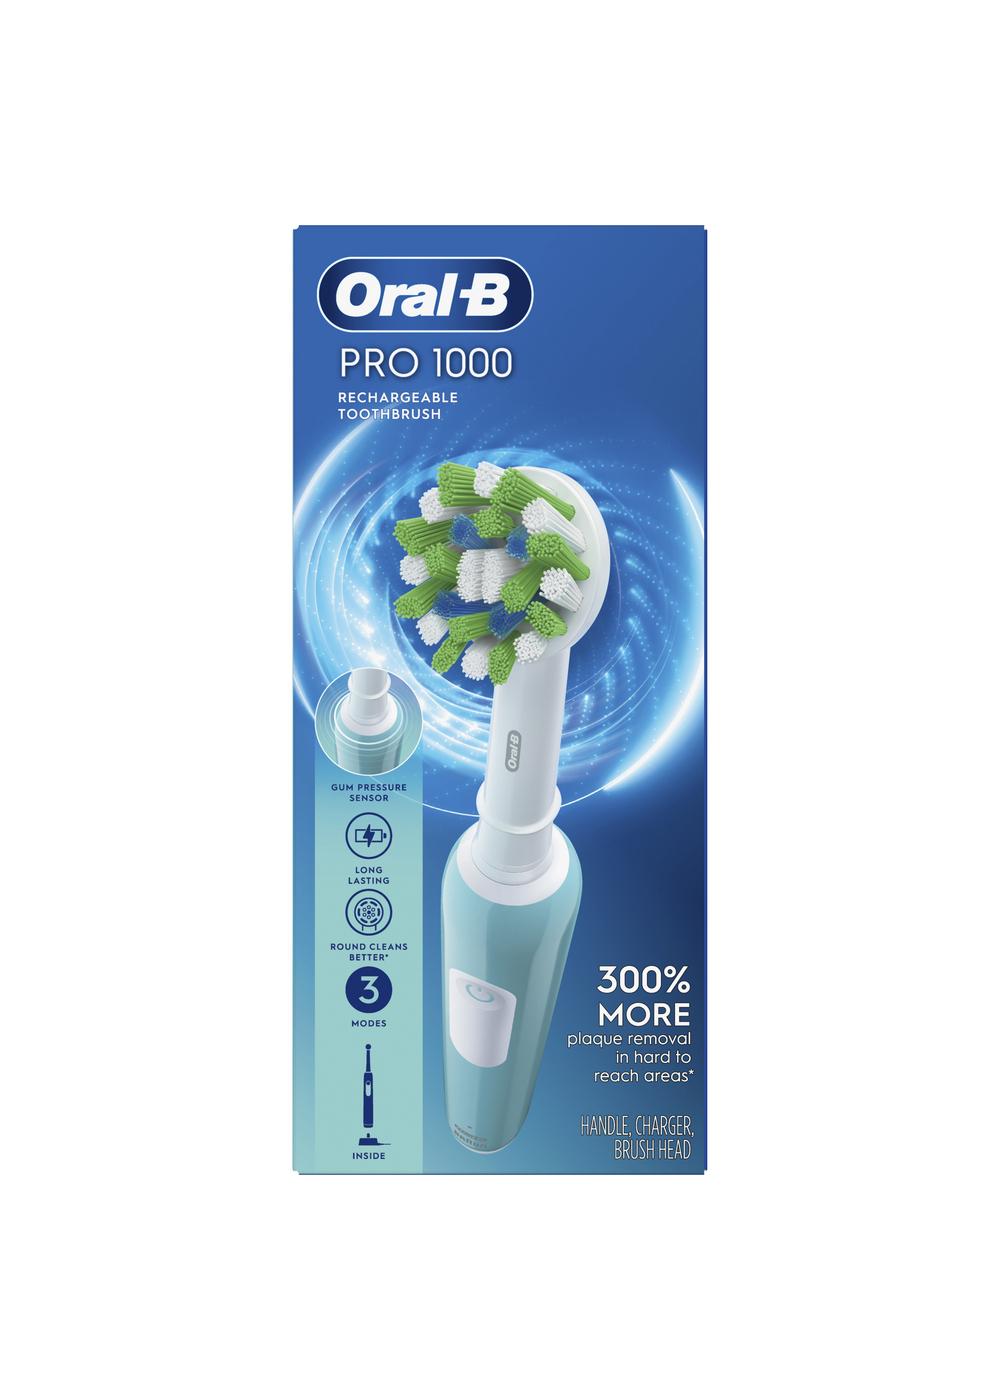 Oral-B Pro 1000 Rechargeable Toothbrush Teal; image 1 of 2